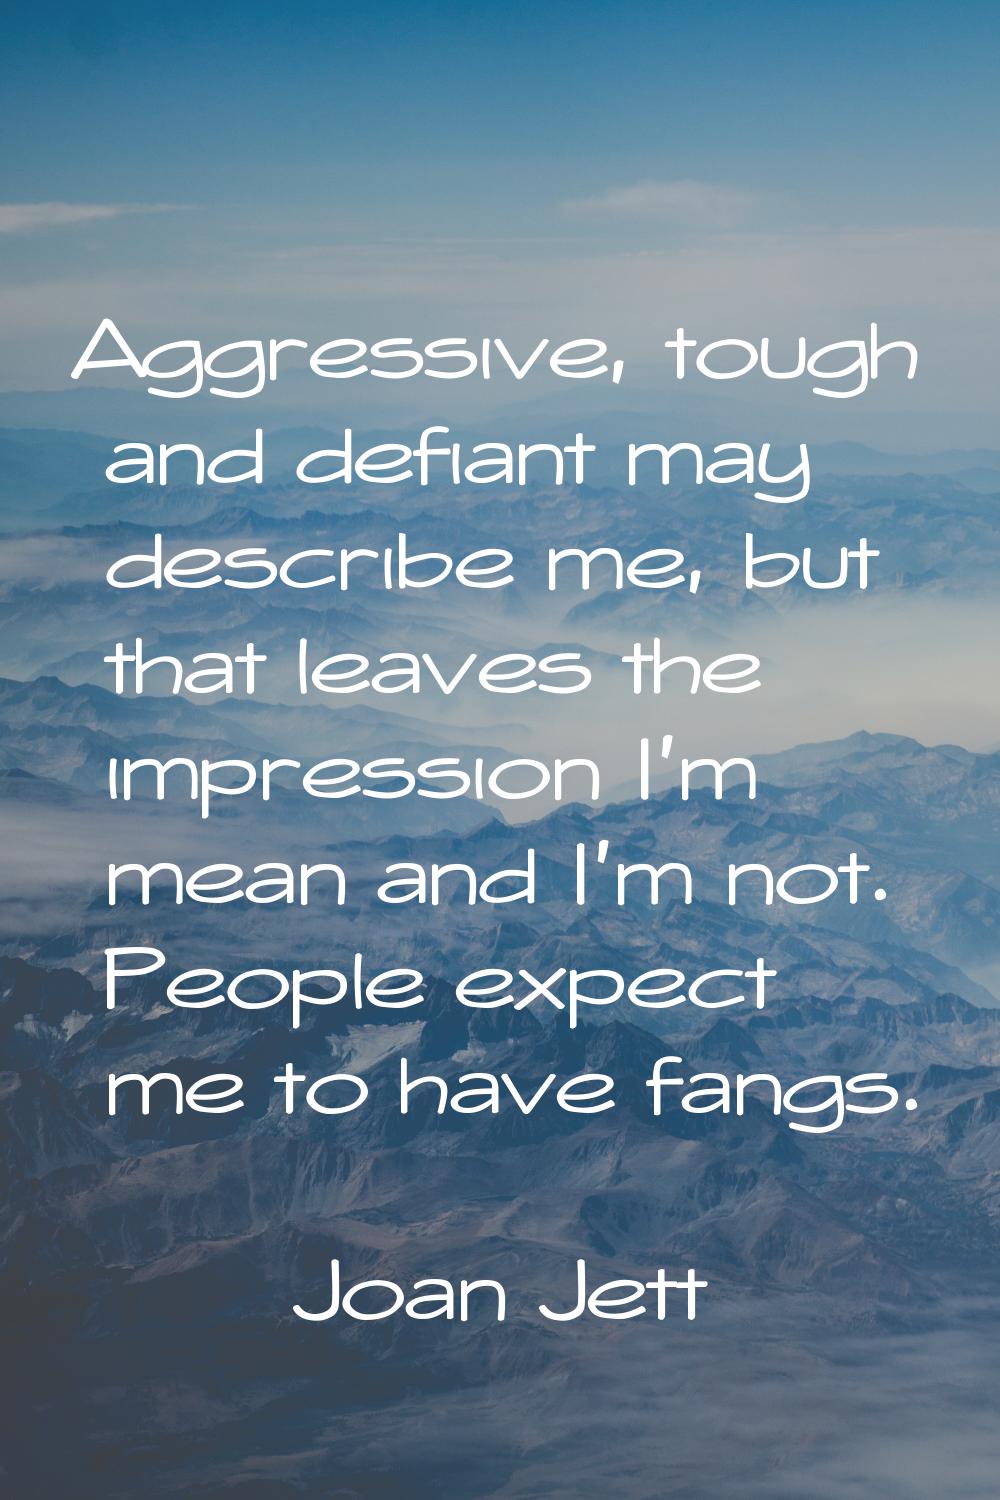 Aggressive, tough and defiant may describe me, but that leaves the impression I'm mean and I'm not.